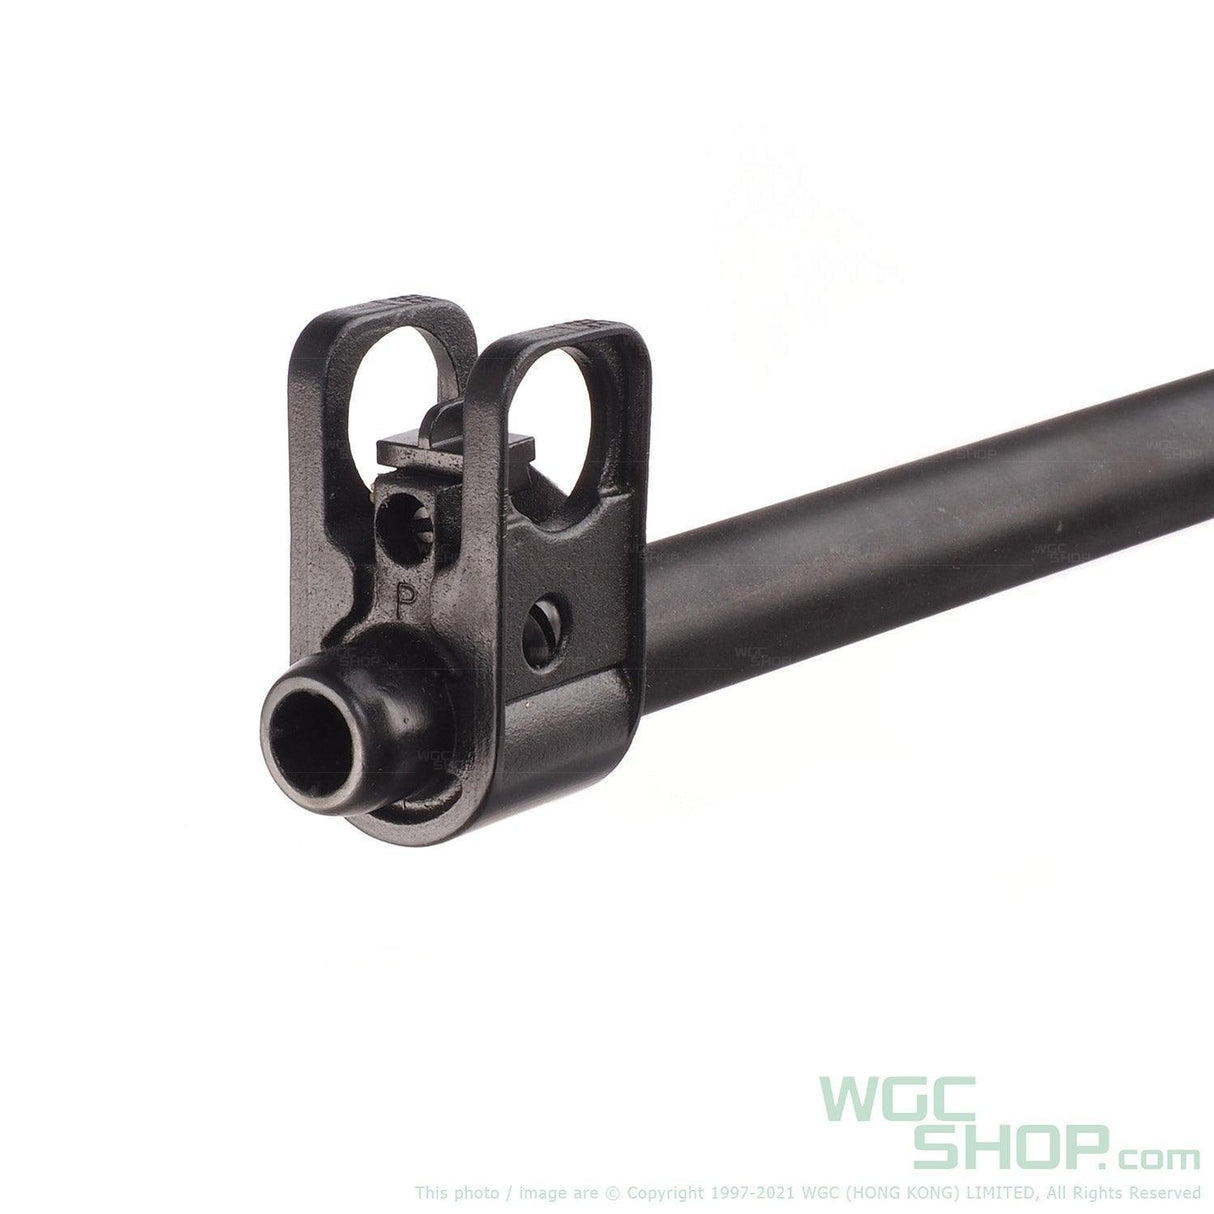 ARES L42A1 Spring Airsoft - with Scope and Mount - WGC Shop